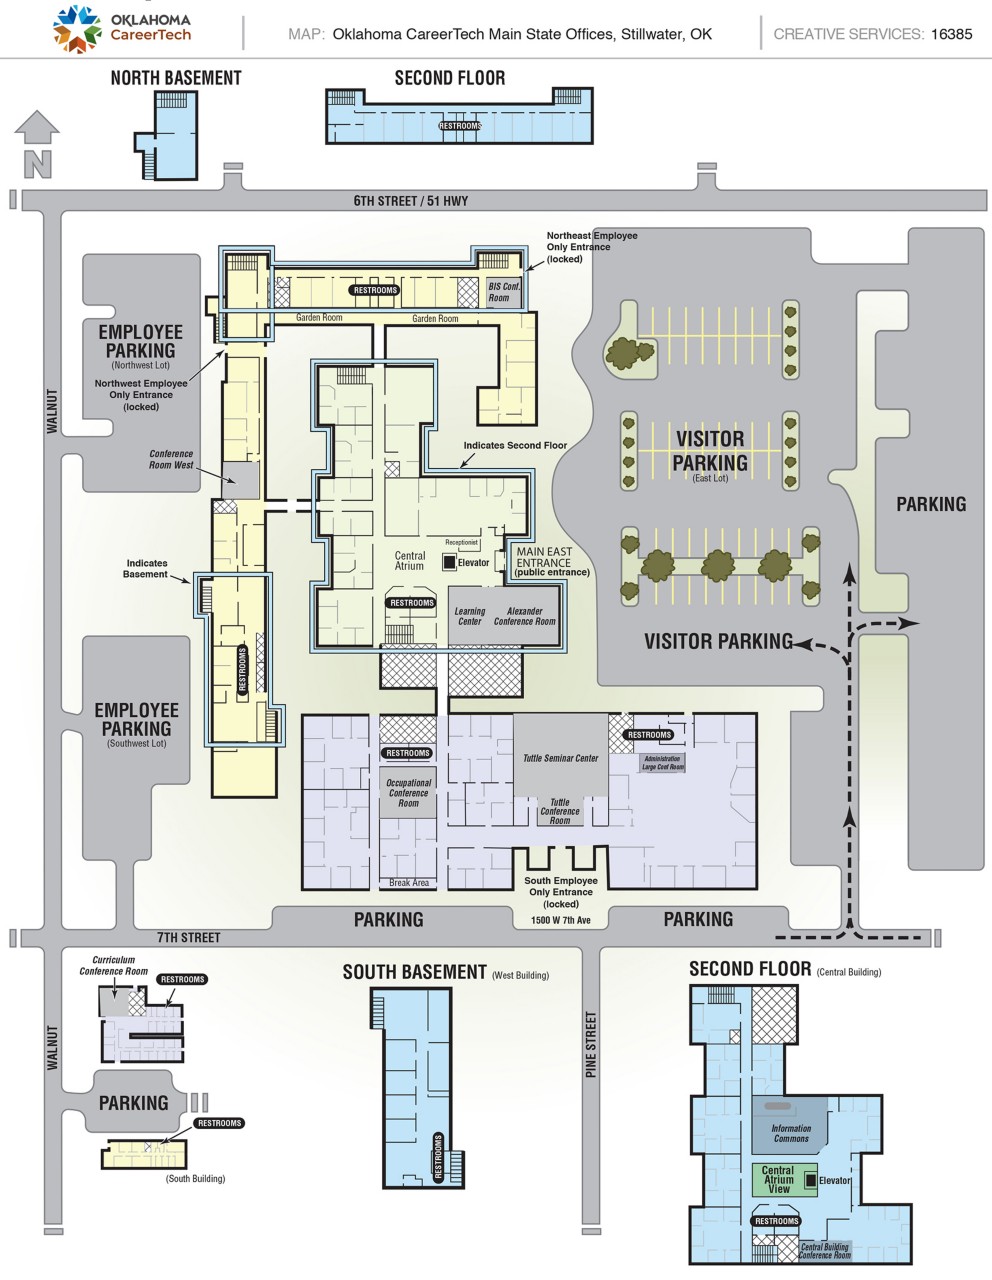 Floor plan map of the CareerTech agency buildings and parking areas.